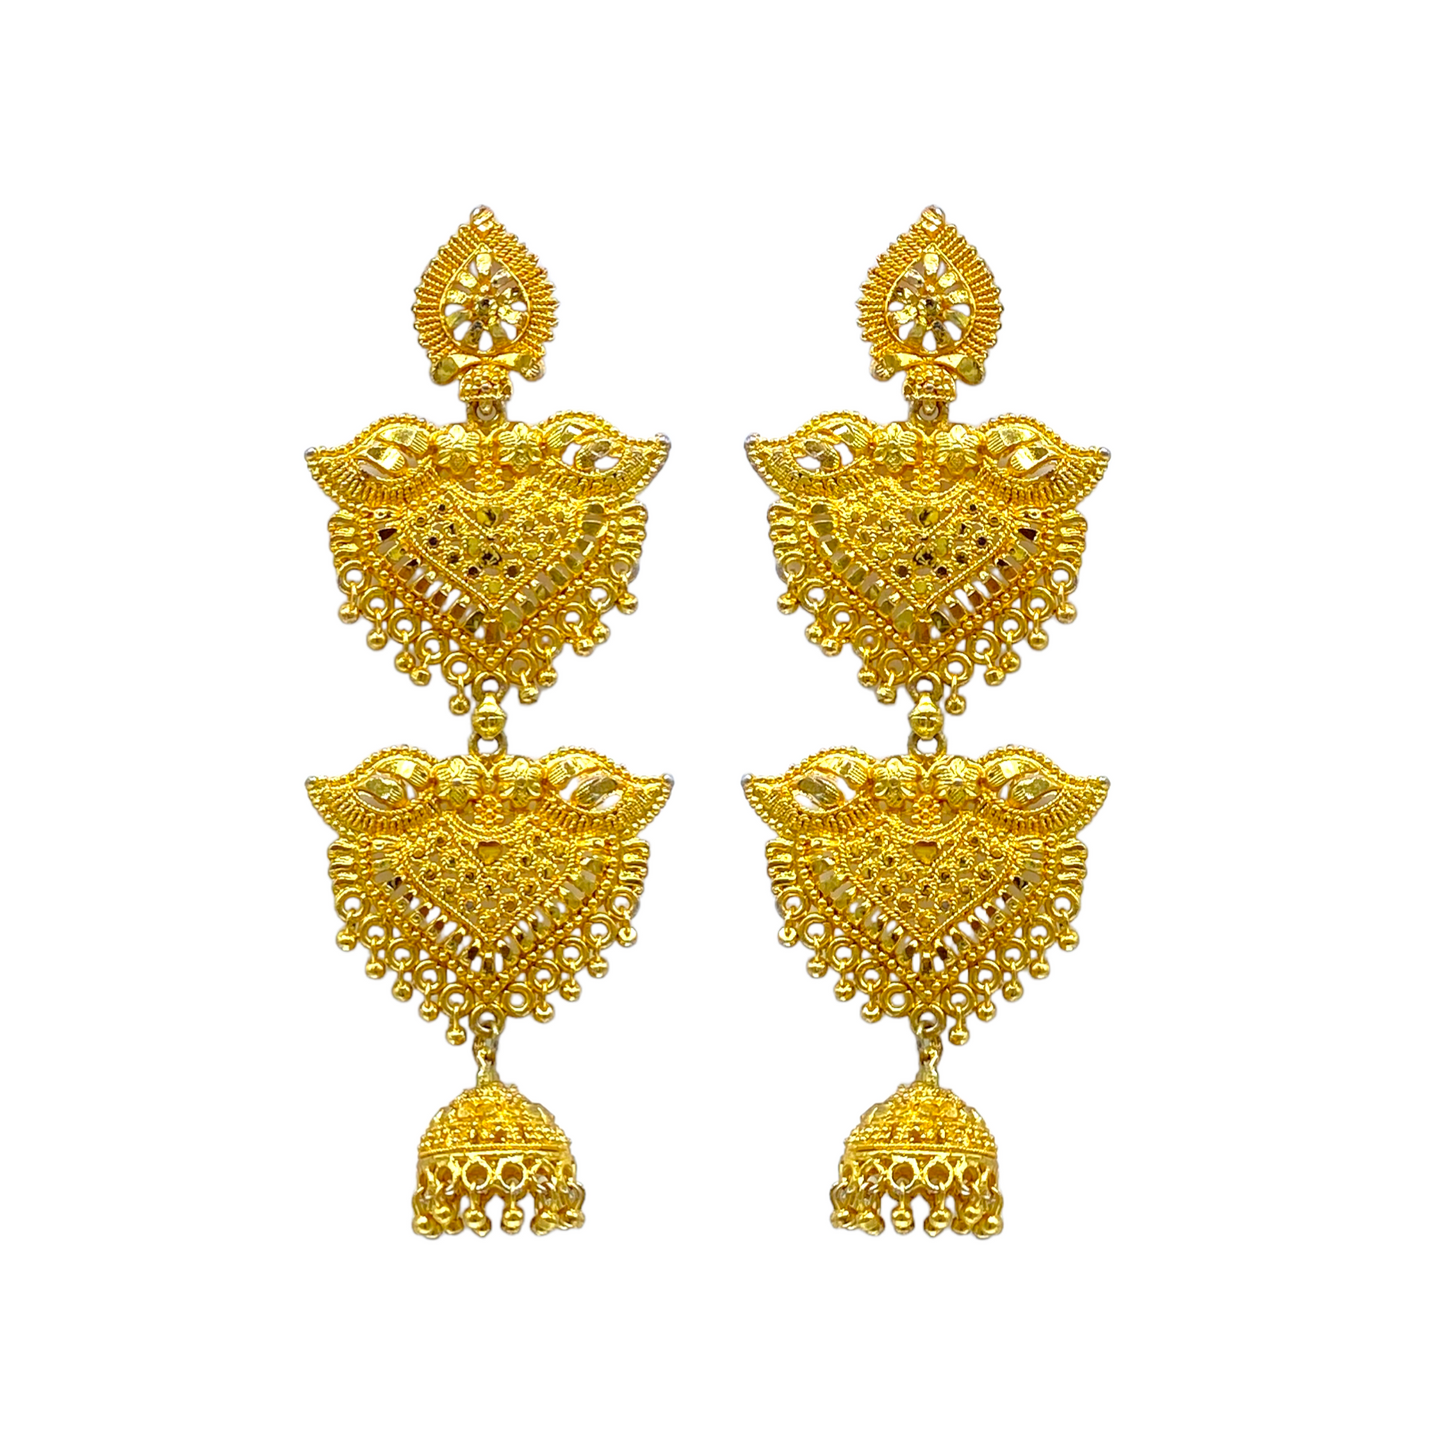 Gold double layered classy Earrings